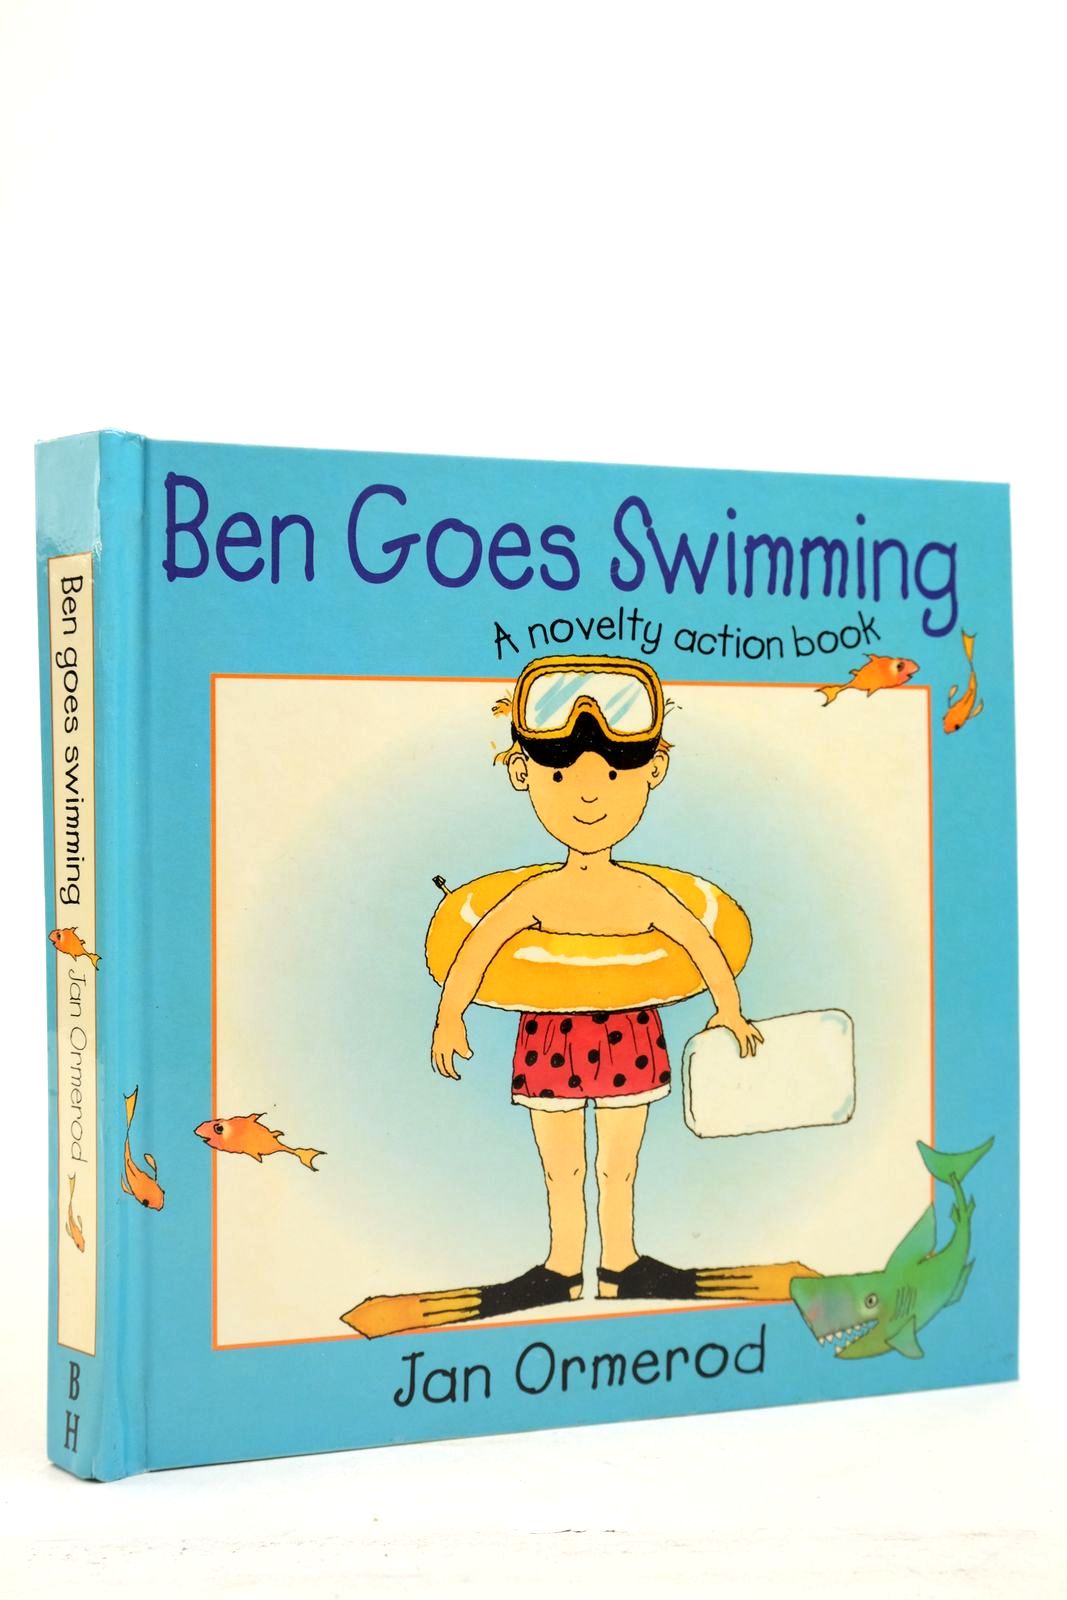 Photo of BEN GOES SWIMMING written by Ormerod, Jan published by The Bodley Head Children's Books (STOCK CODE: 2140909)  for sale by Stella & Rose's Books